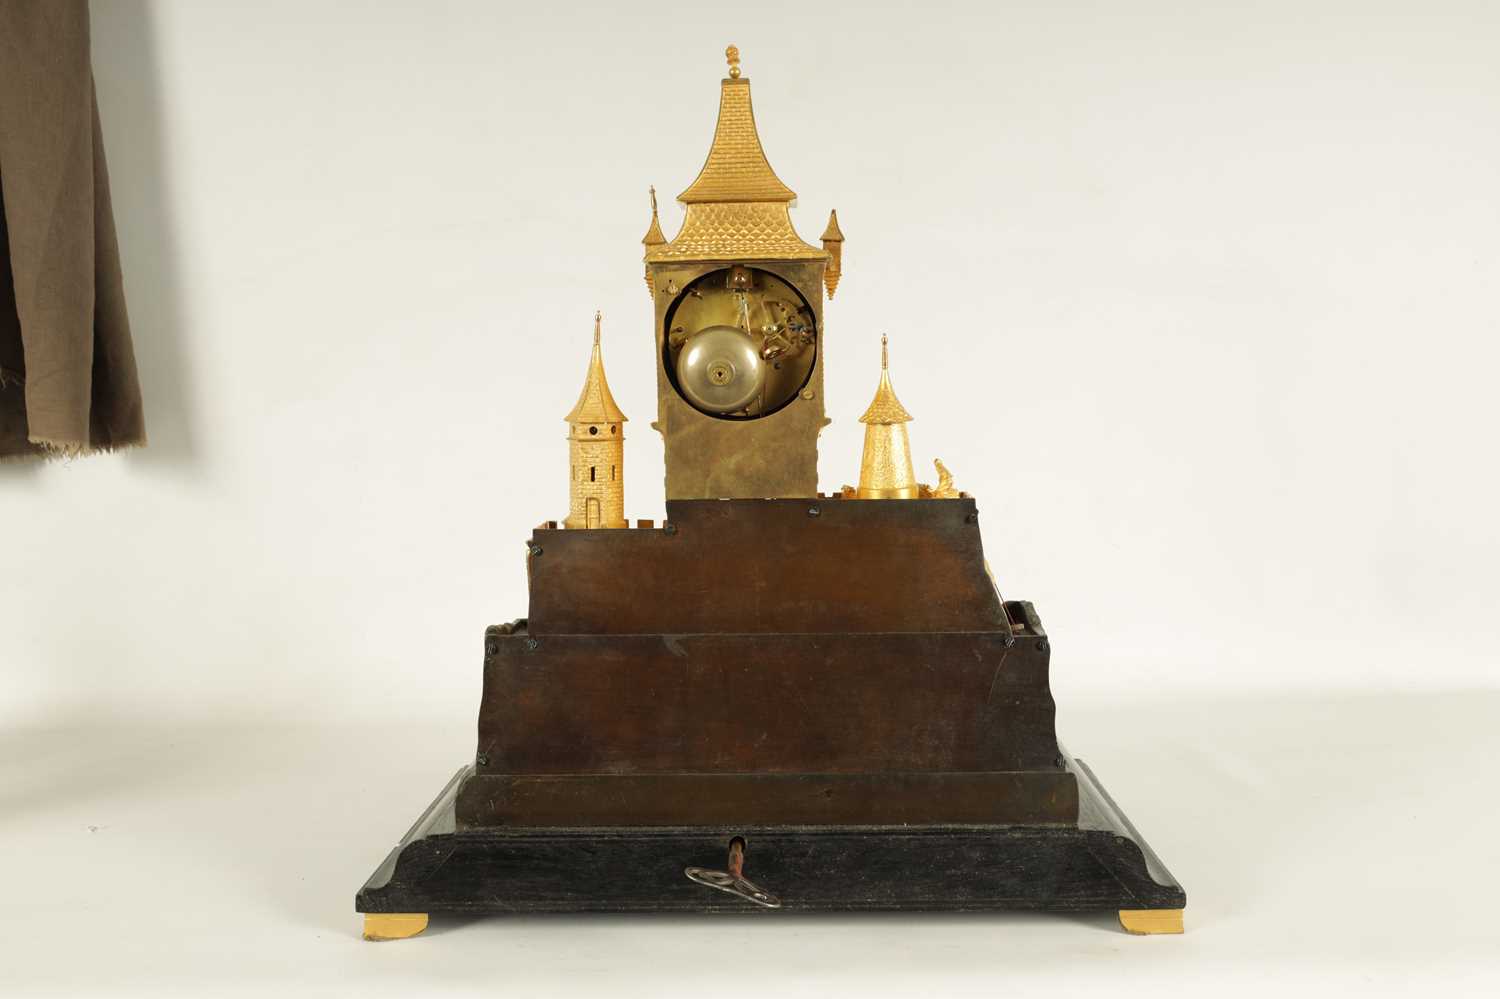 A LARGE MID 19TH CENTURY FRENCH BRONZE AND ORMOLU AUTOMATION MANTEL CLOCK - Image 8 of 11